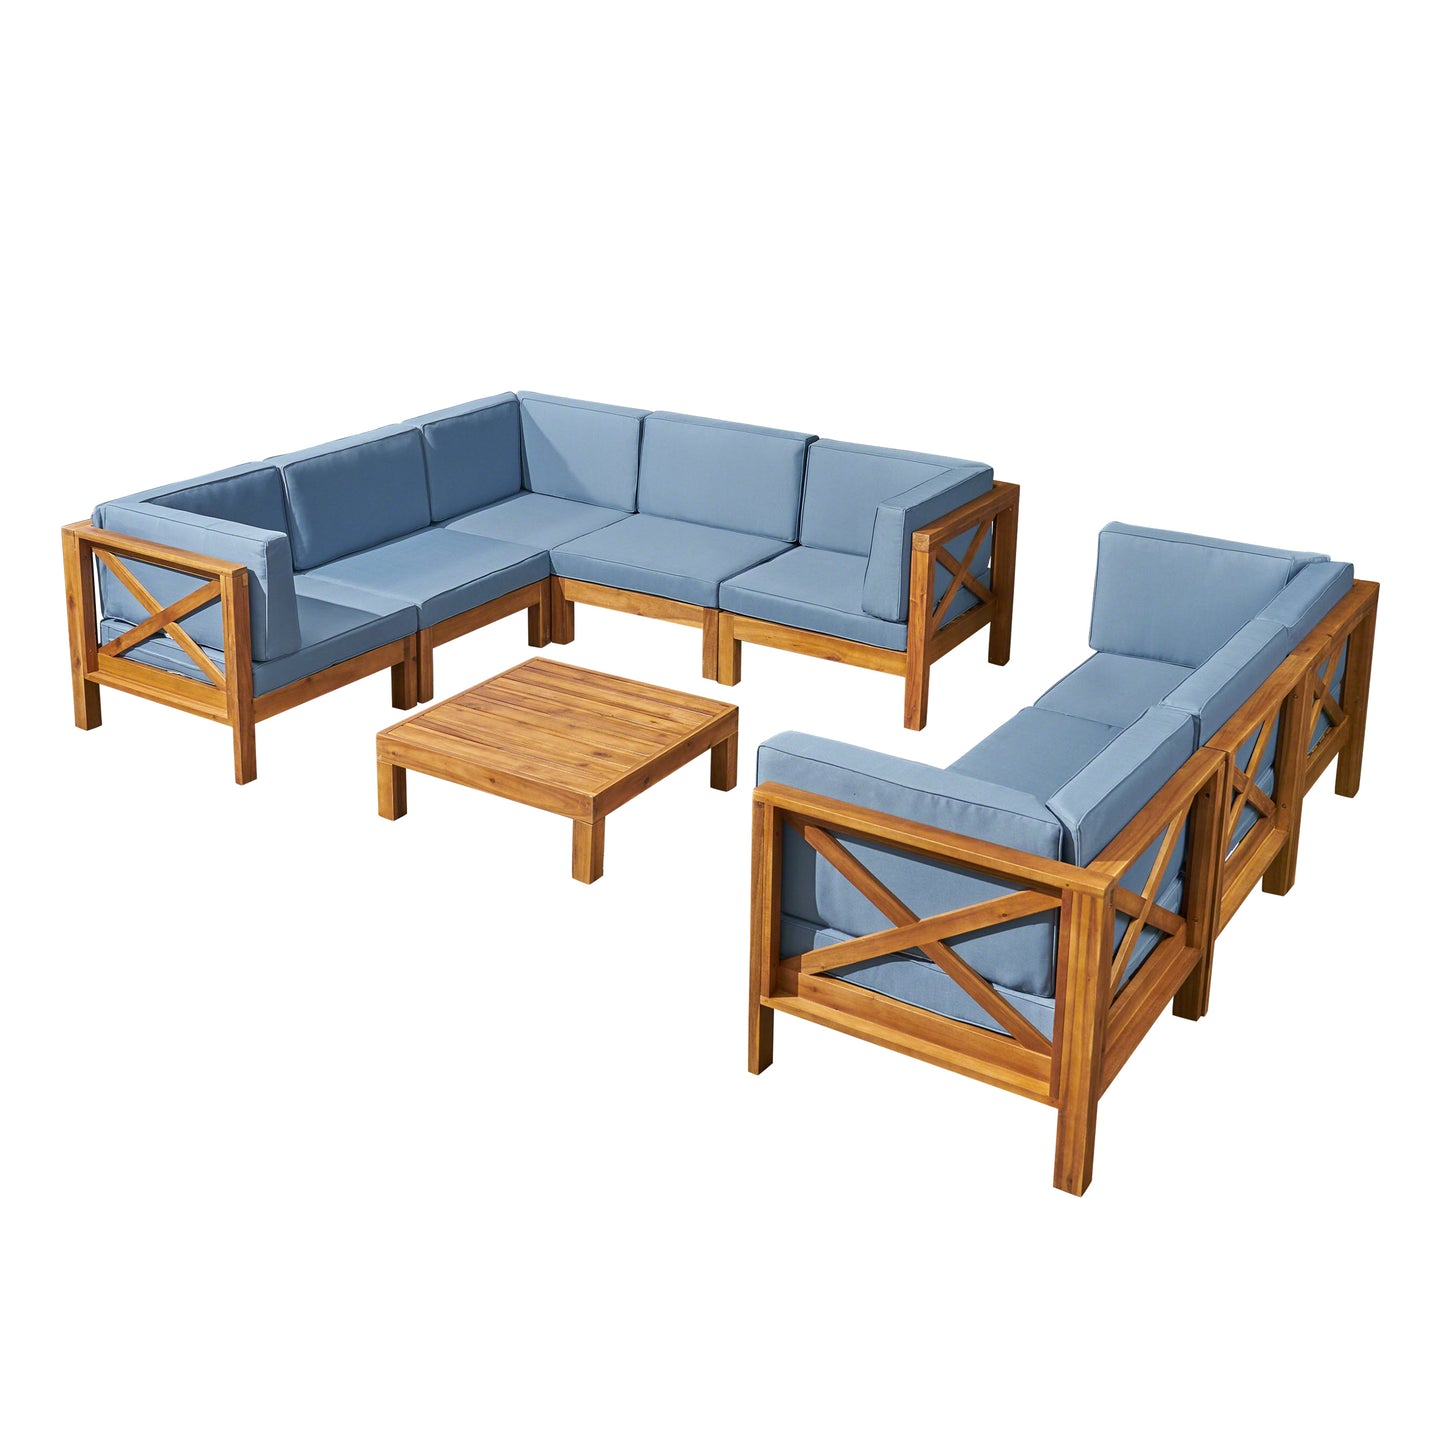 Cynthia Outdoor Acacia Wood 8 Seater Sectional Sofa Set with Coffee Table, Teak, Blue